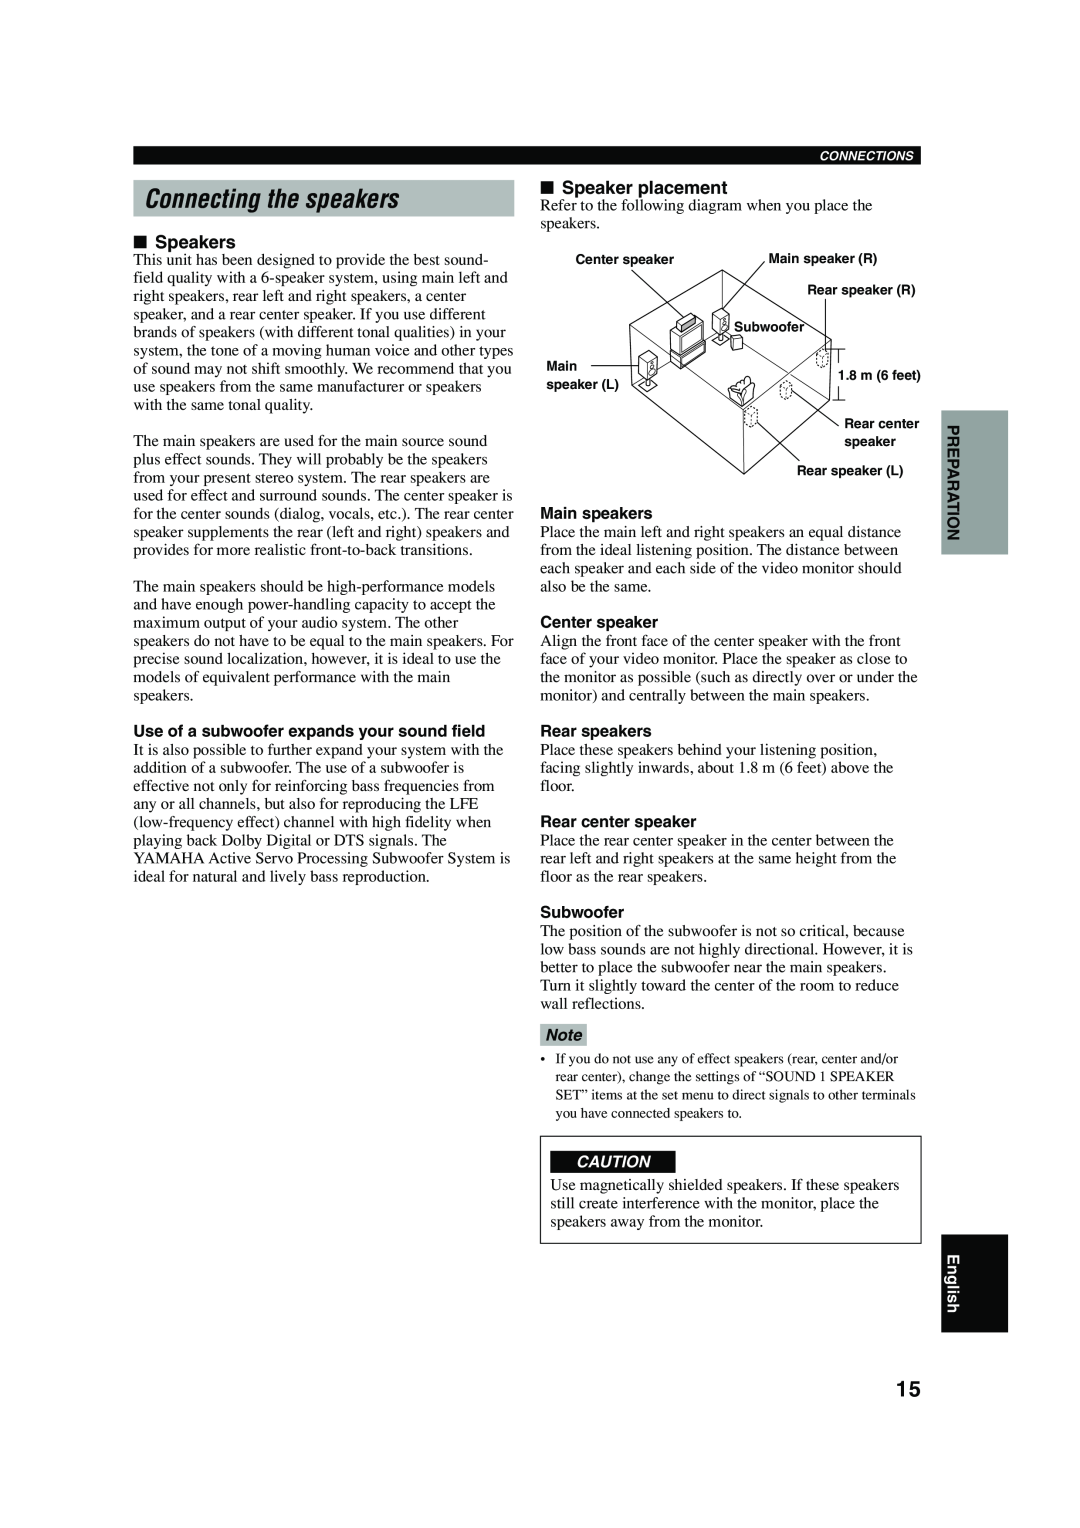 Yamaha HTR-5640 owner manual Connecting the speakers, Speakers, Speaker placement, English 